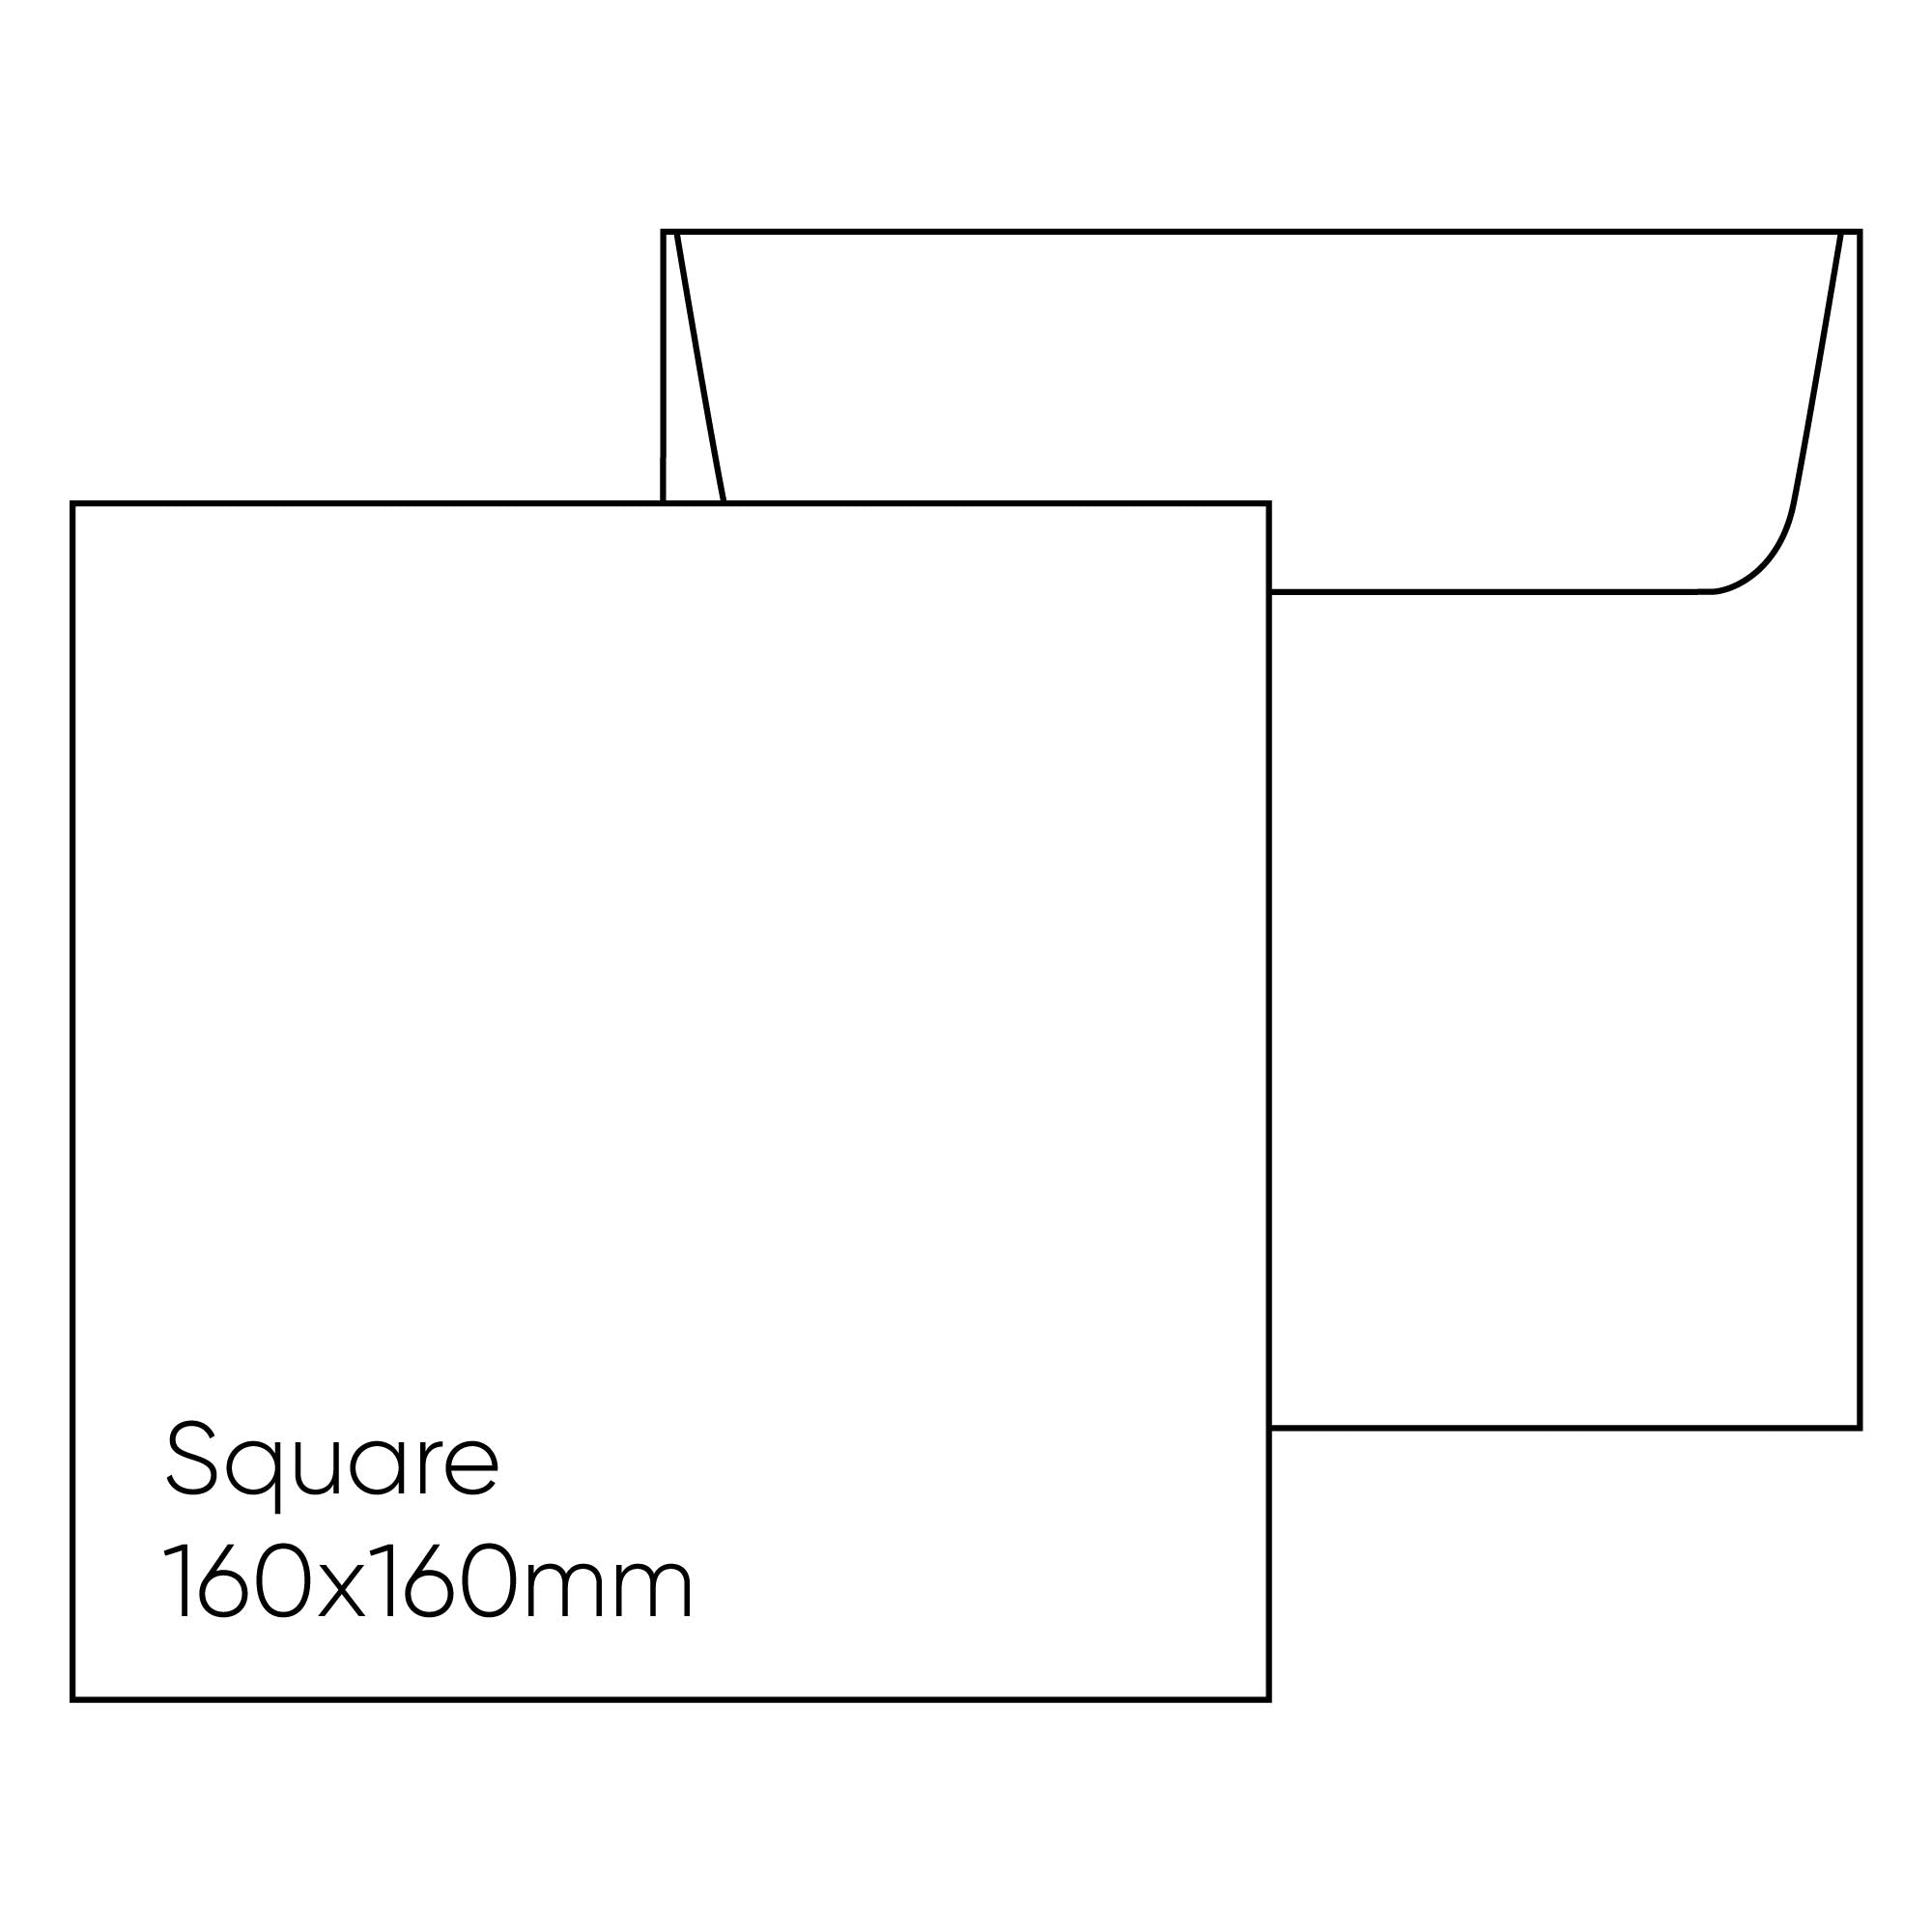 Knight 160mm Square Envelope - Knight White, Pack of 10